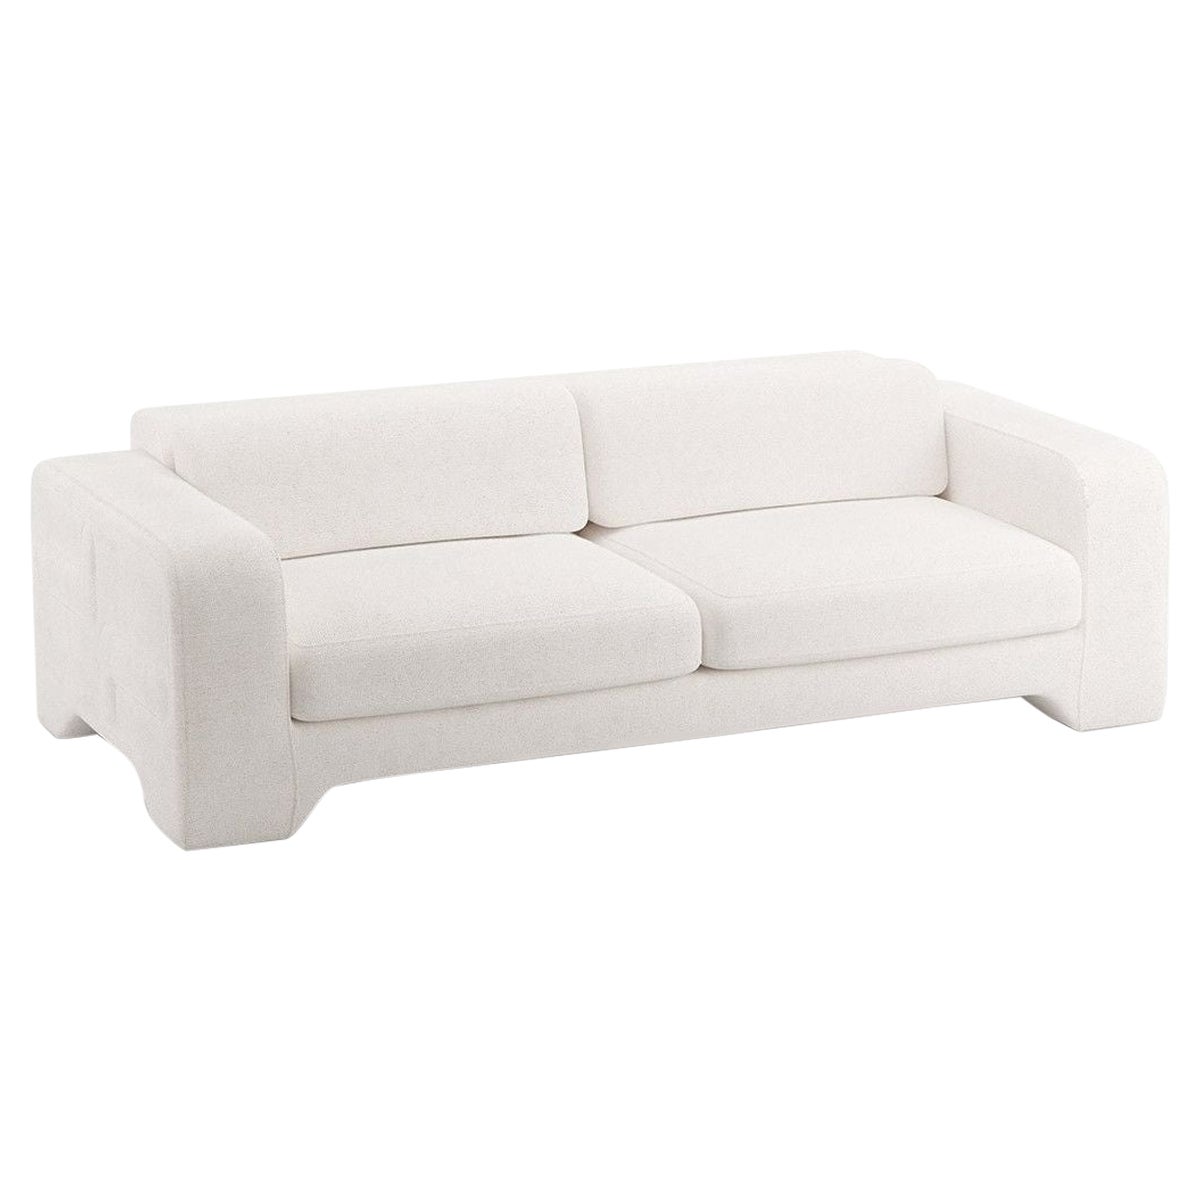 Popus Editions Giovanna 3 Seater Sofa in Ivory Megeve Fabric with Knit Effect For Sale